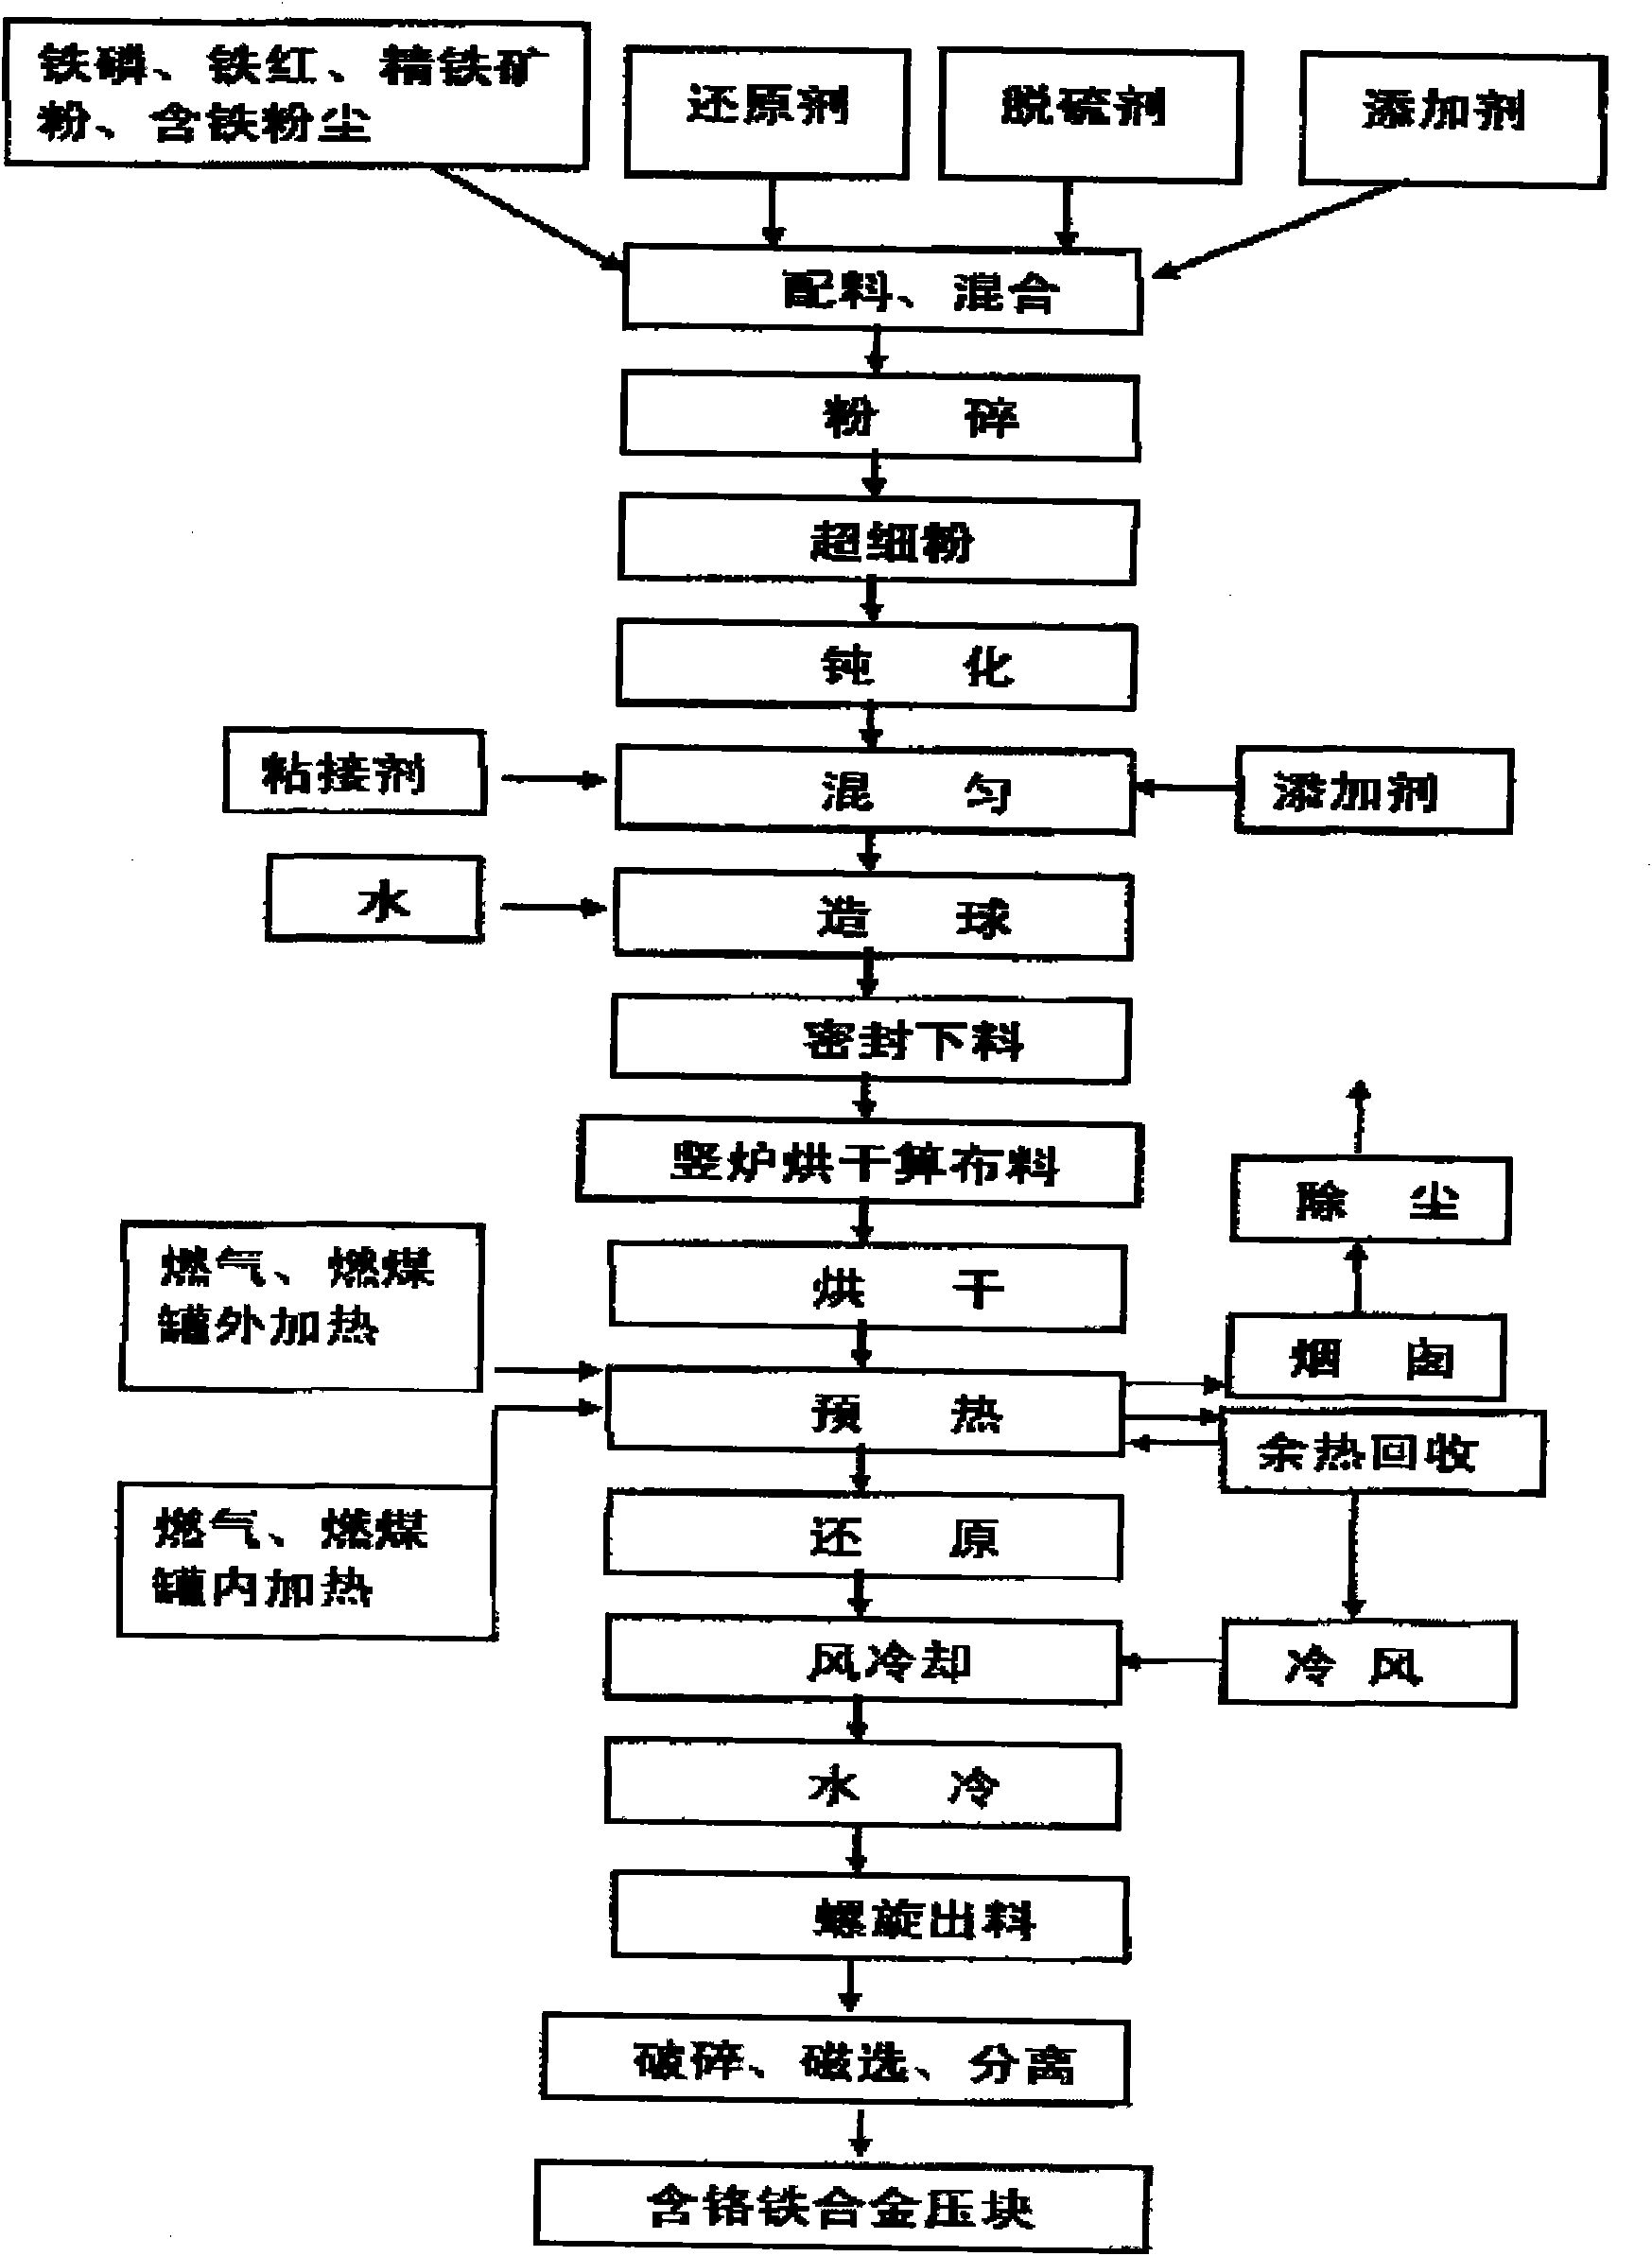 Preparation process and device of sponge iron